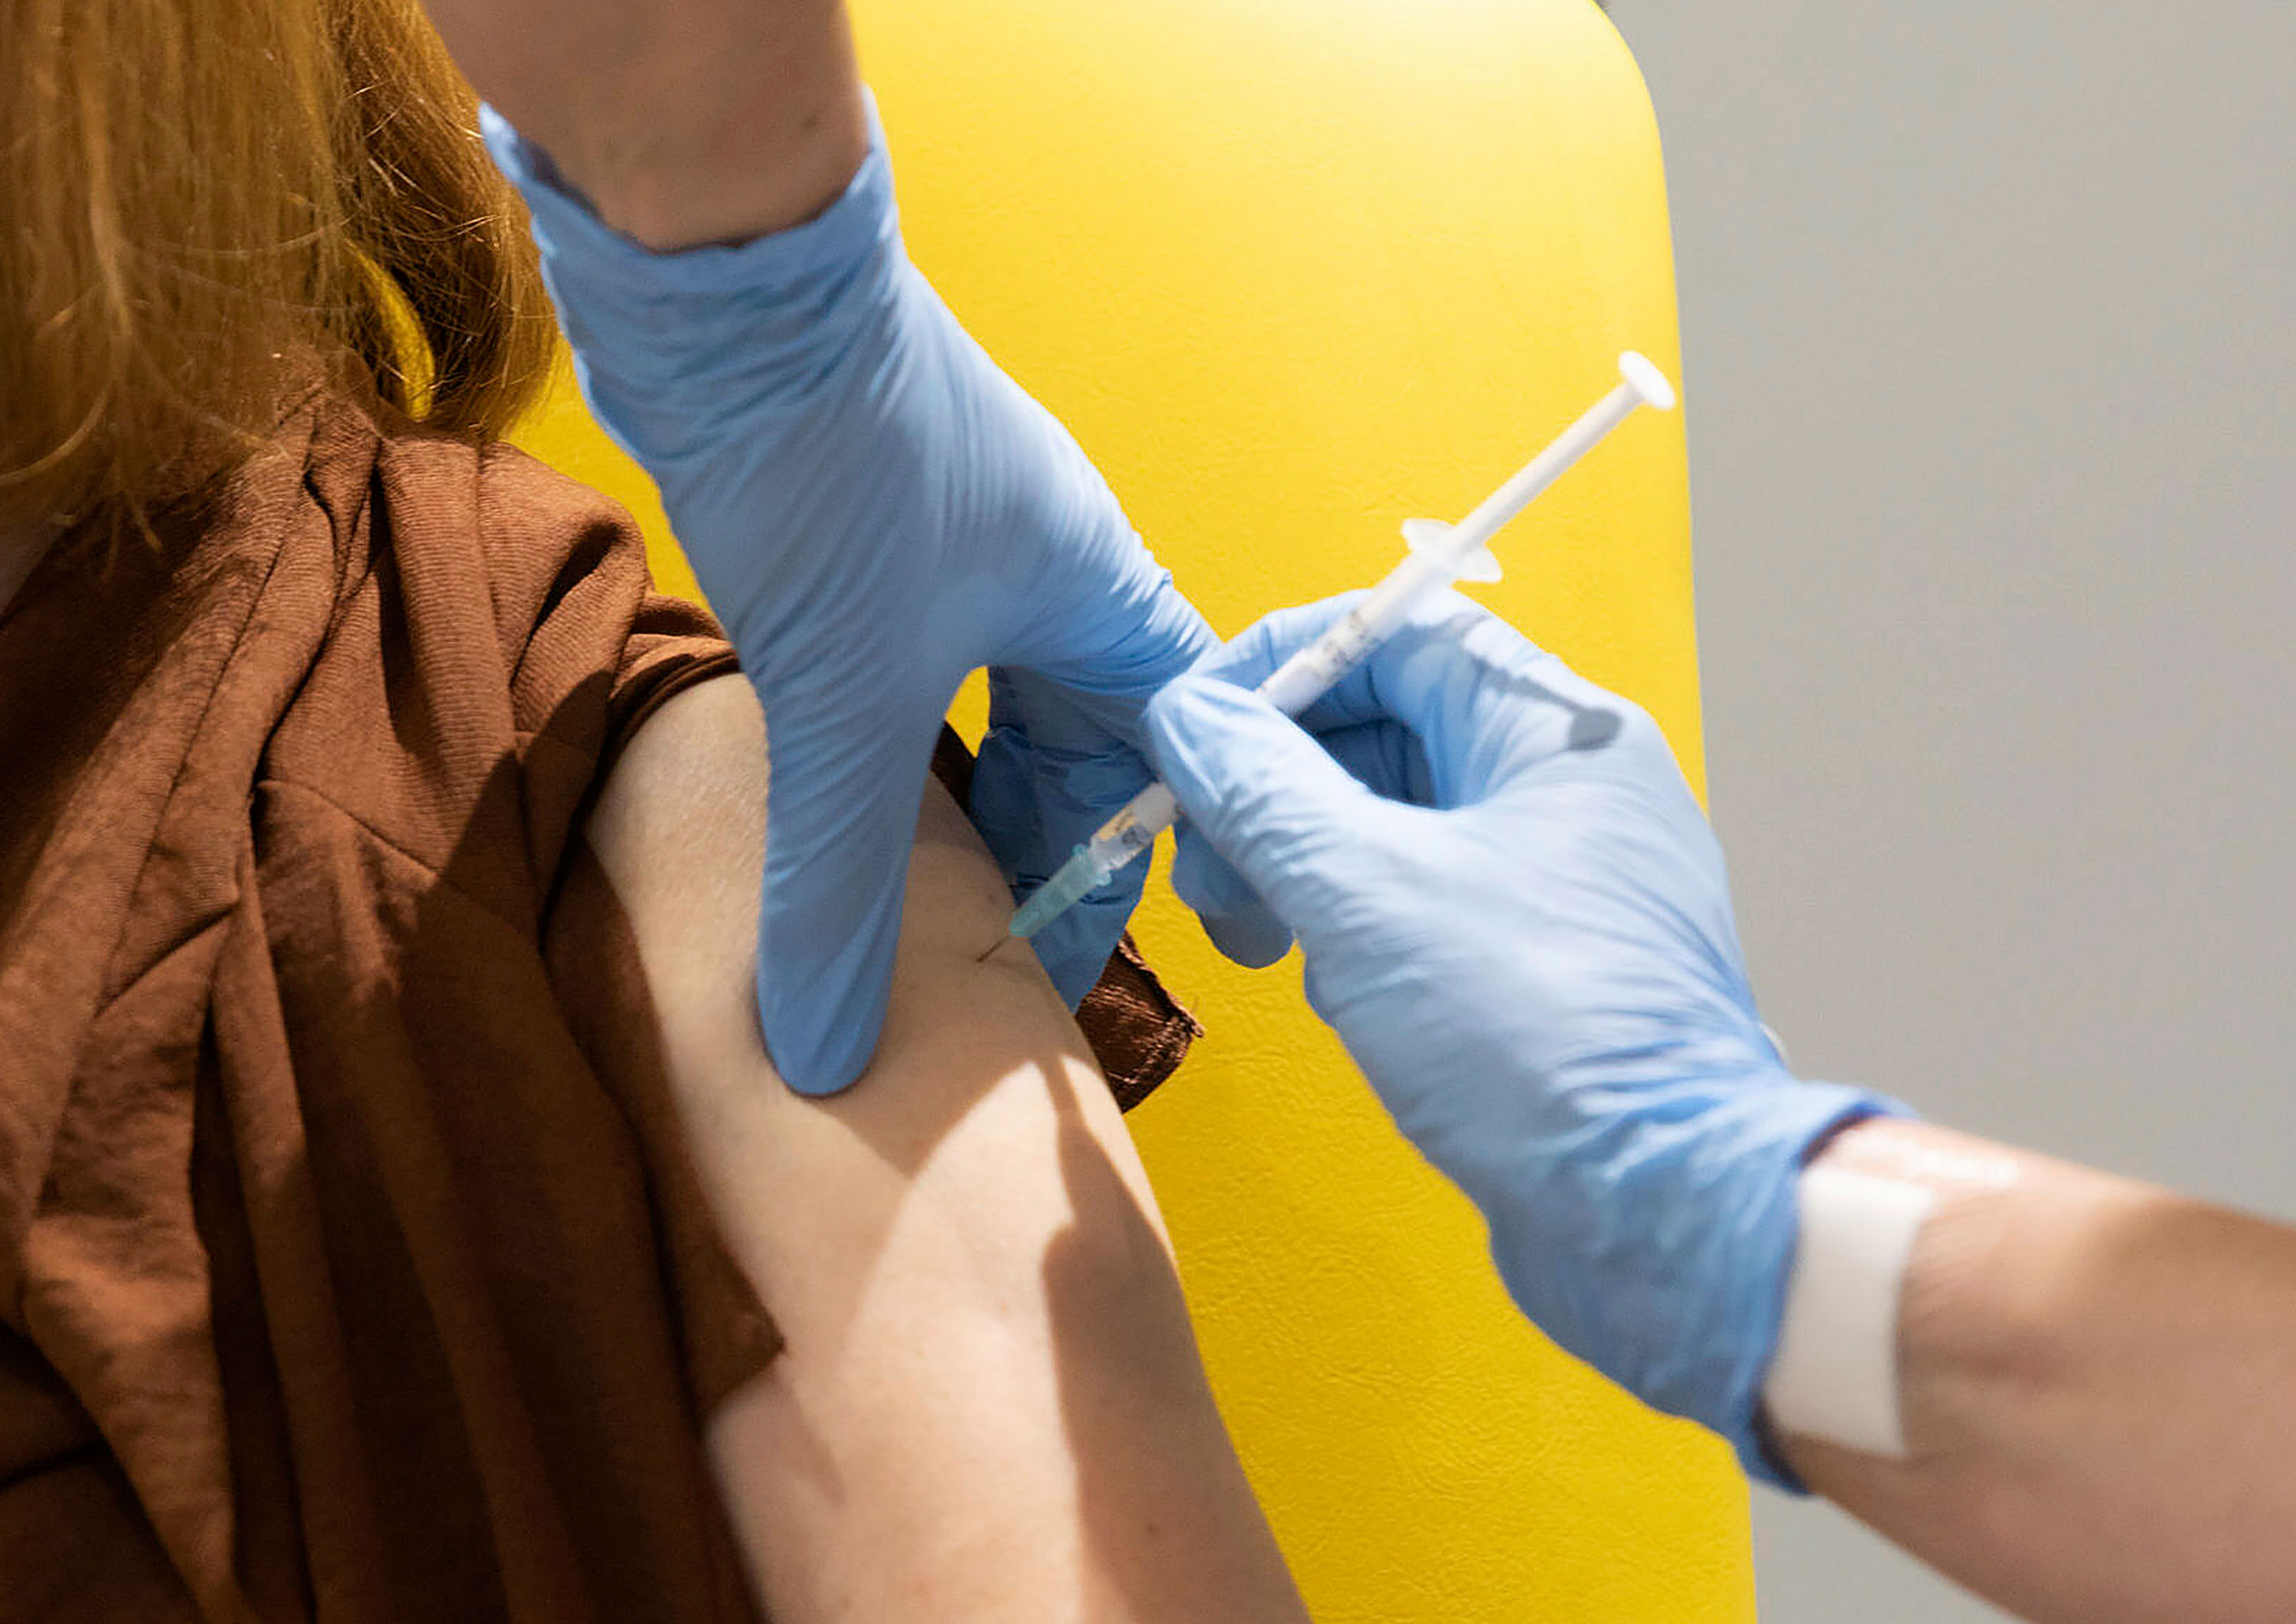 A volunteer in Oxford, England, is administered a coronavirus vaccine developed by AstraZeneca and Oxford University.